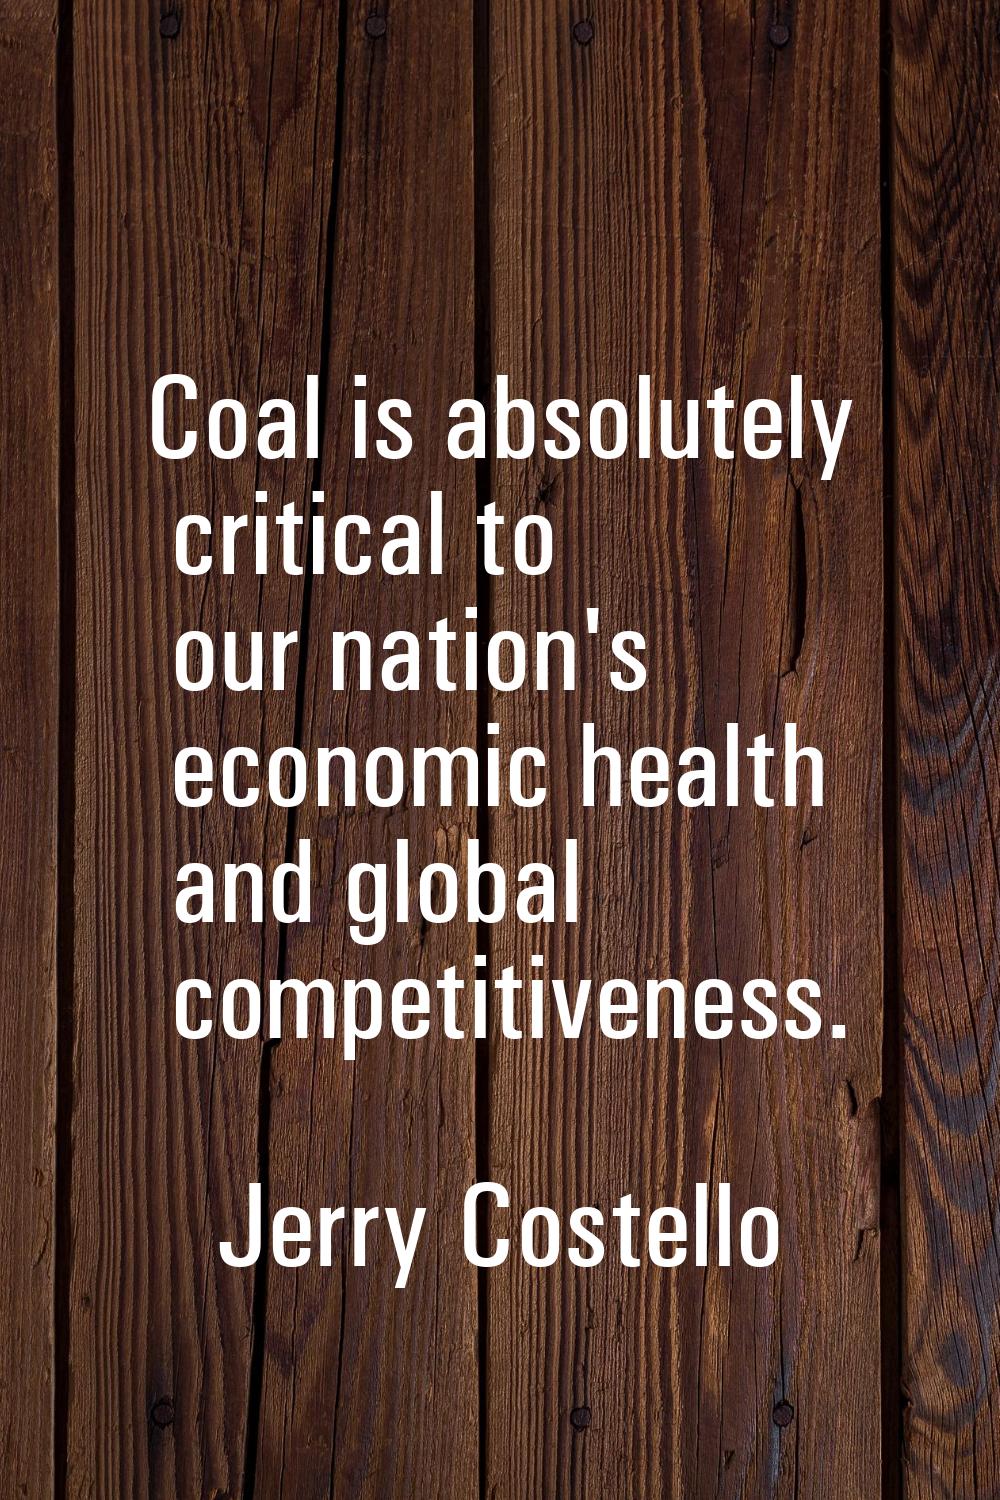 Coal is absolutely critical to our nation's economic health and global competitiveness.